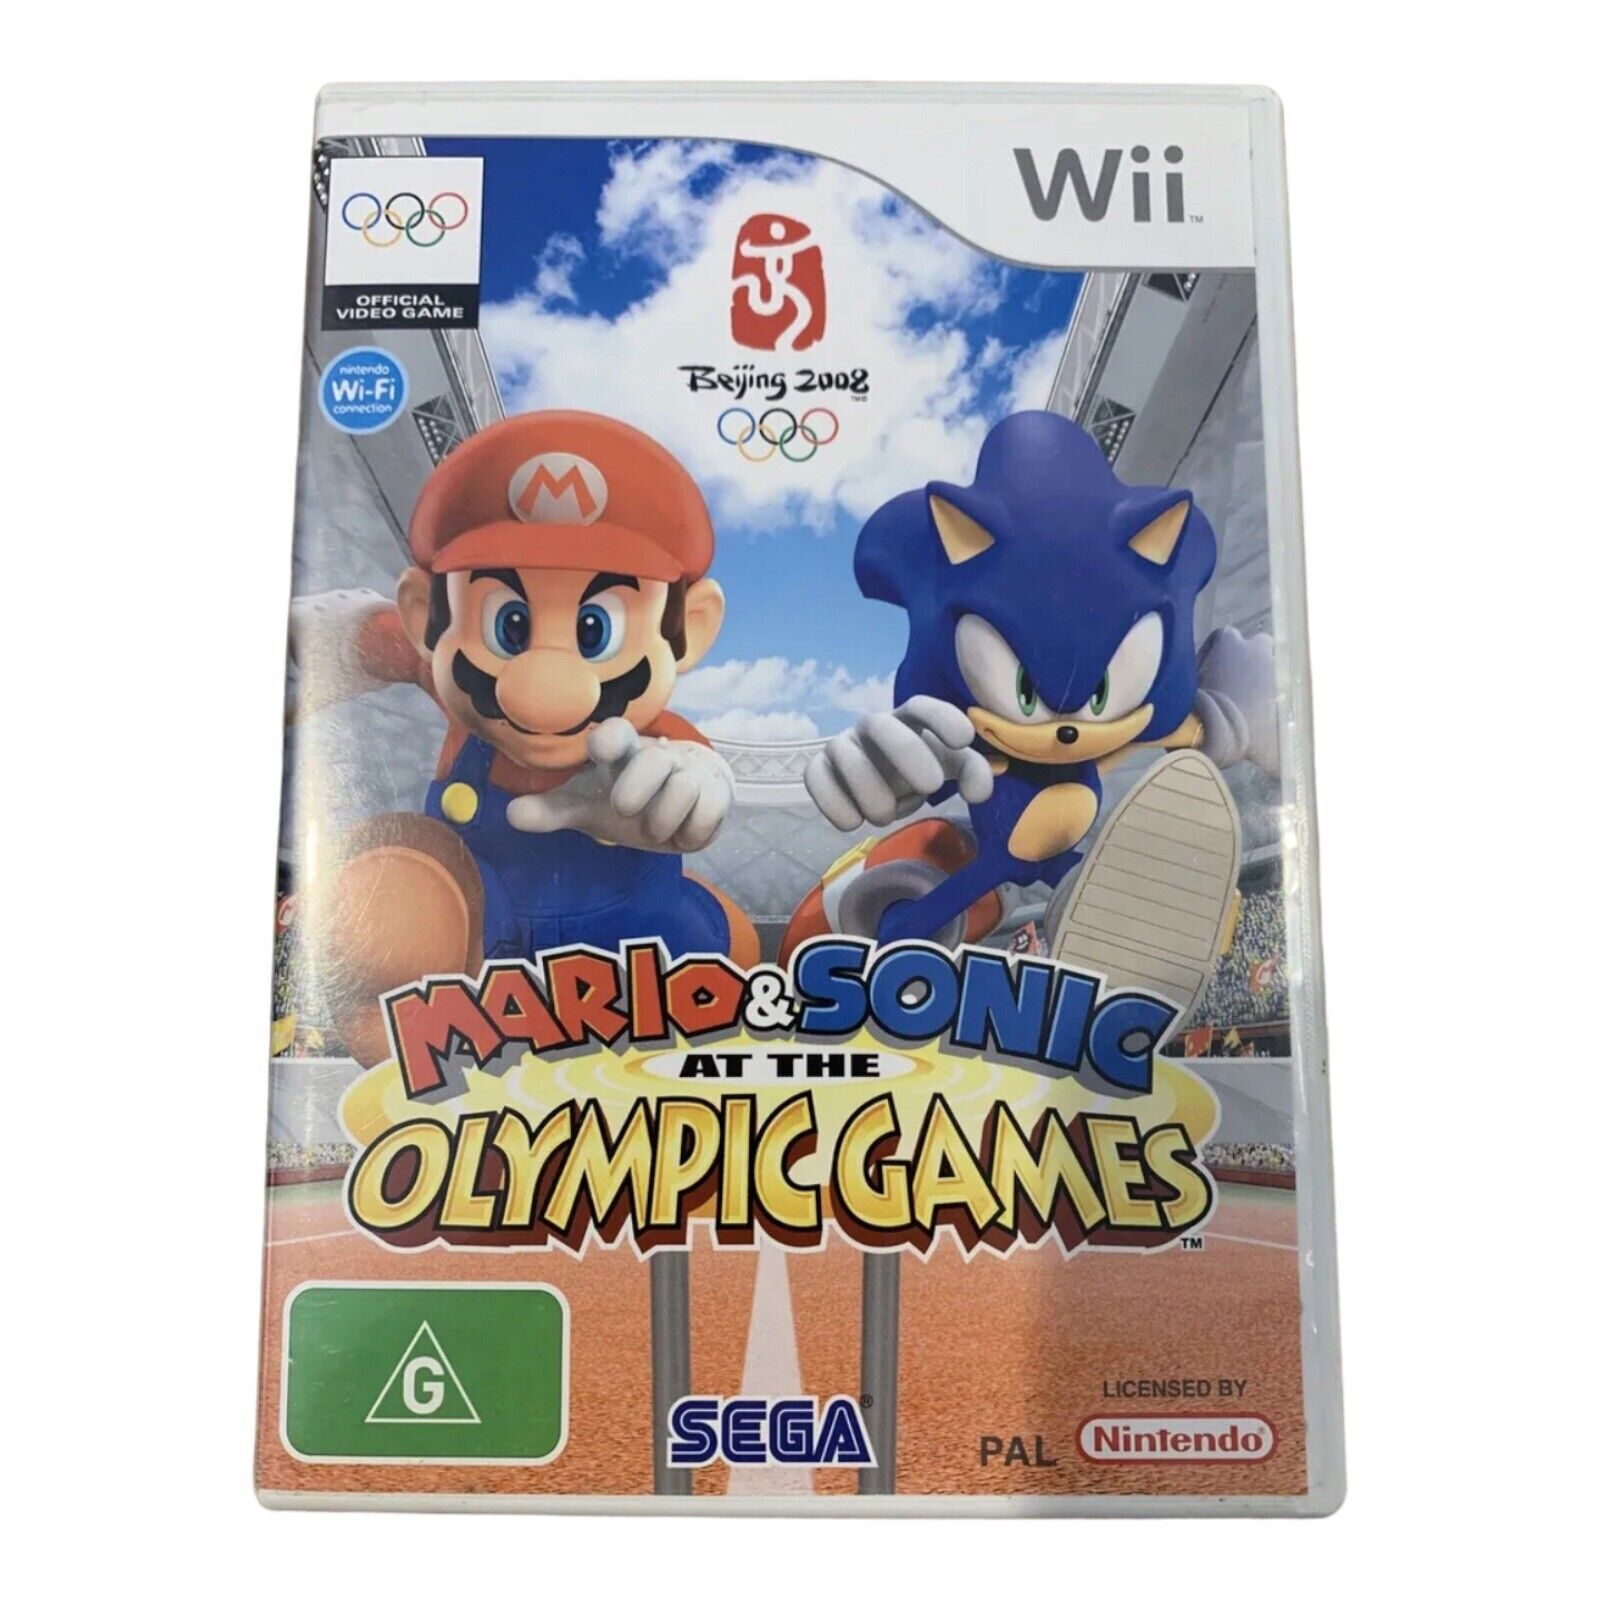 Mario and Sonic at The Olympic Games (Wii, 2007) for sale online eBay